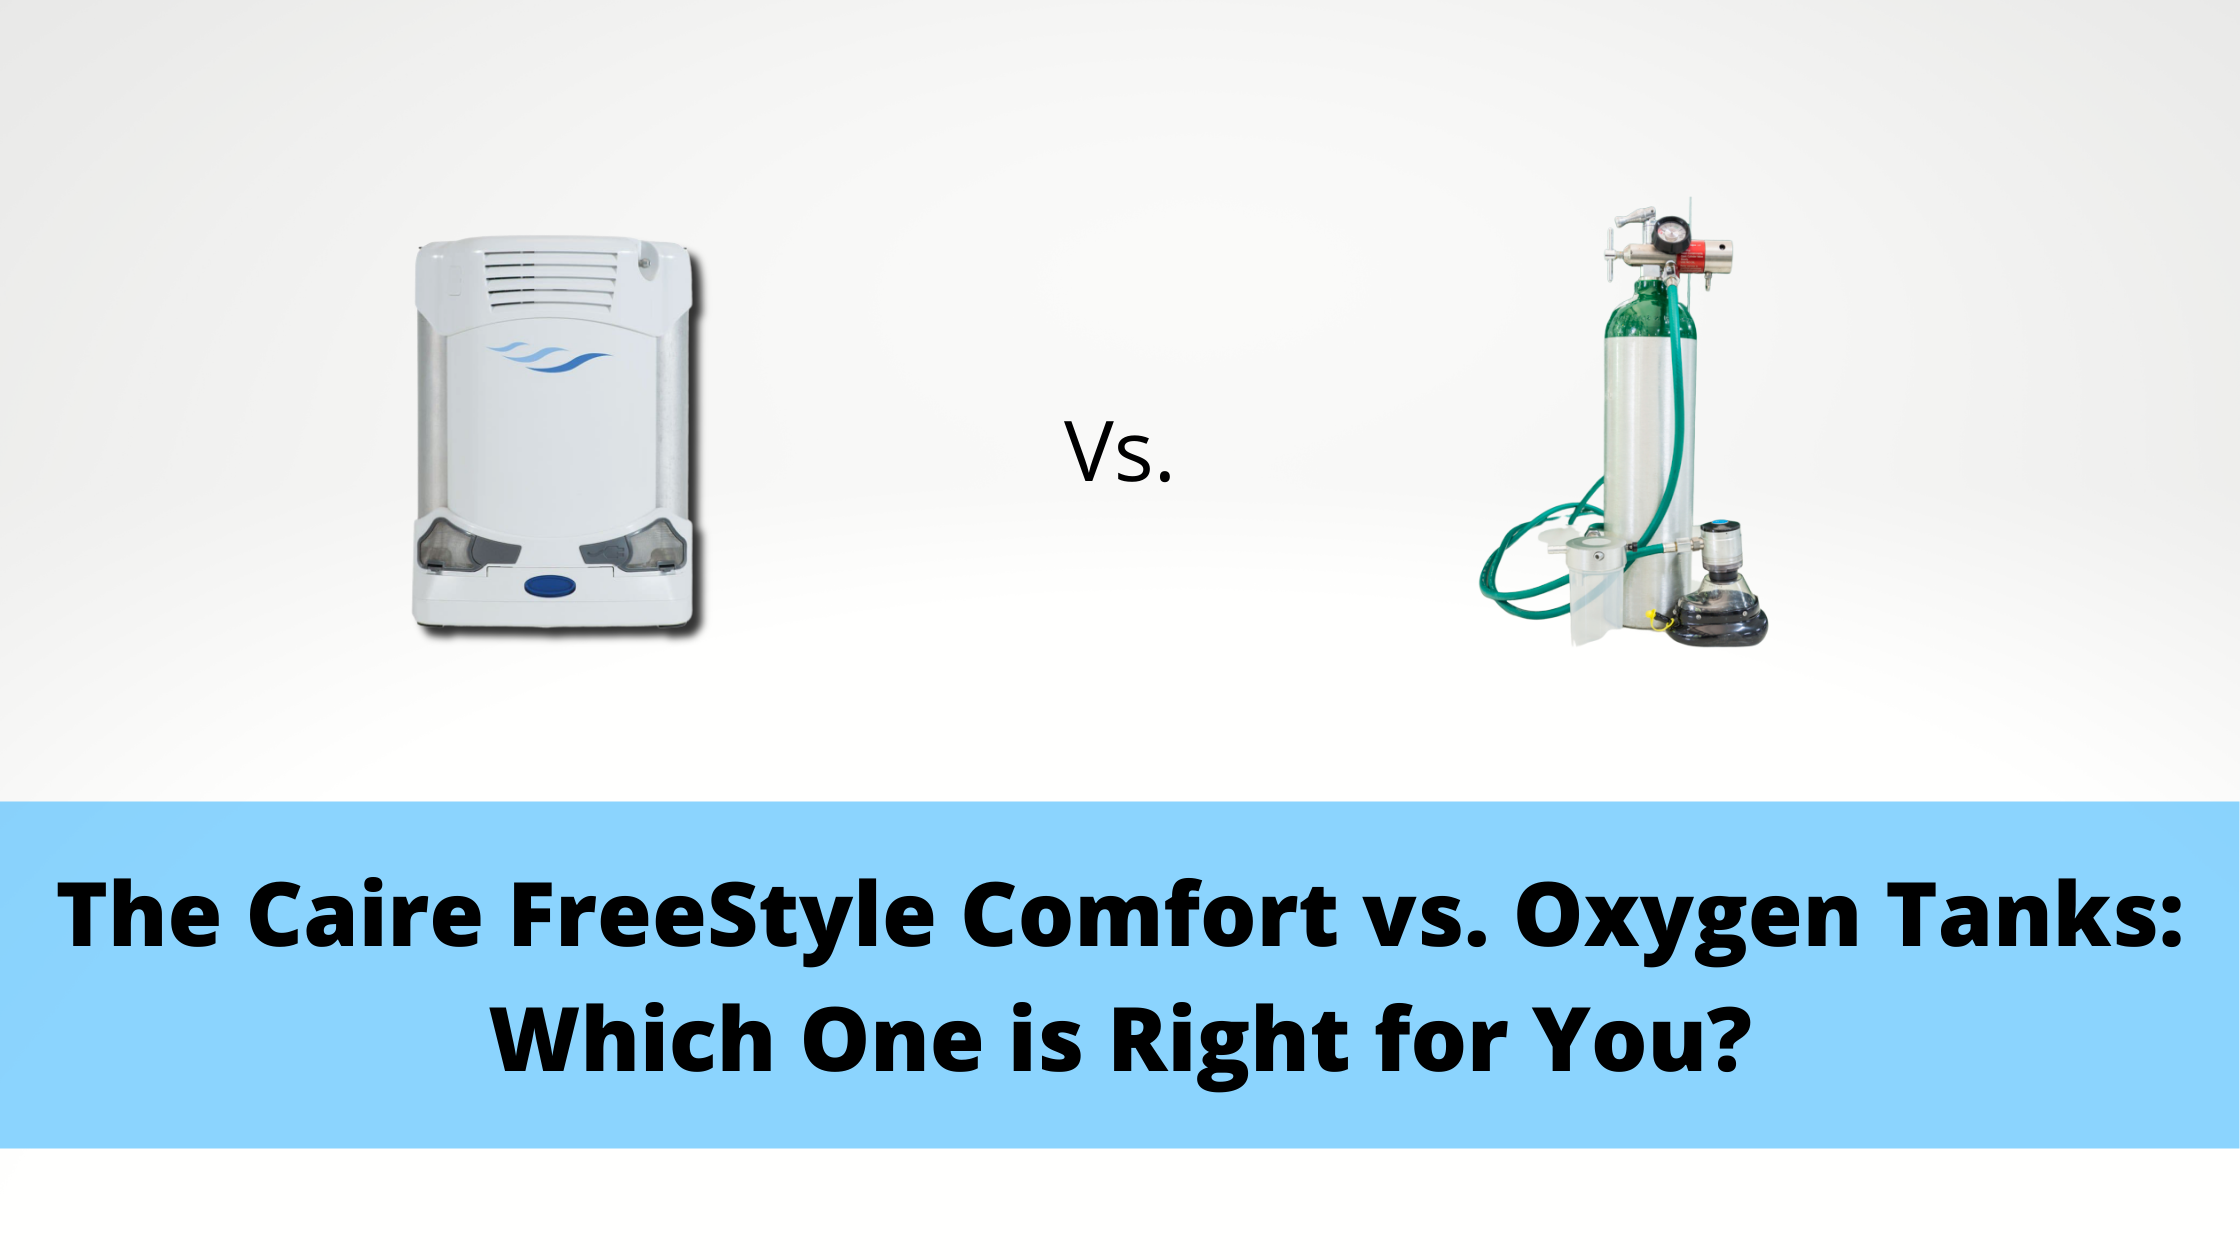 The Caire FreeStyle Comfort vs. Oxygen Tanks: Which One is Right for You?